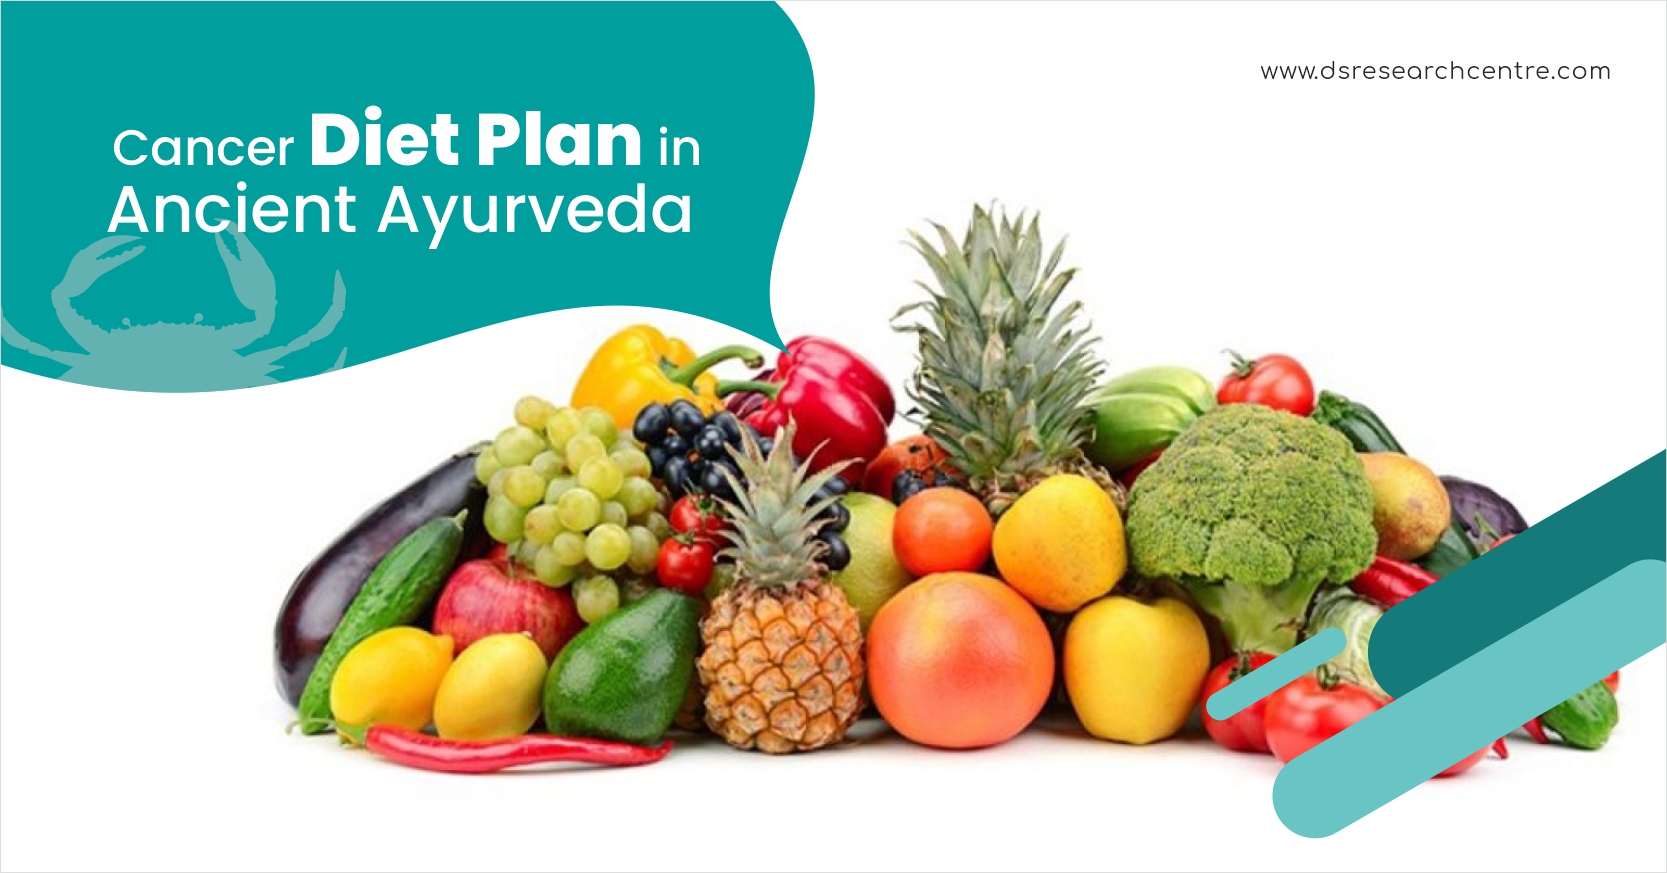 A Detailed Guide to Cancer Diet Plan in Ayurveda